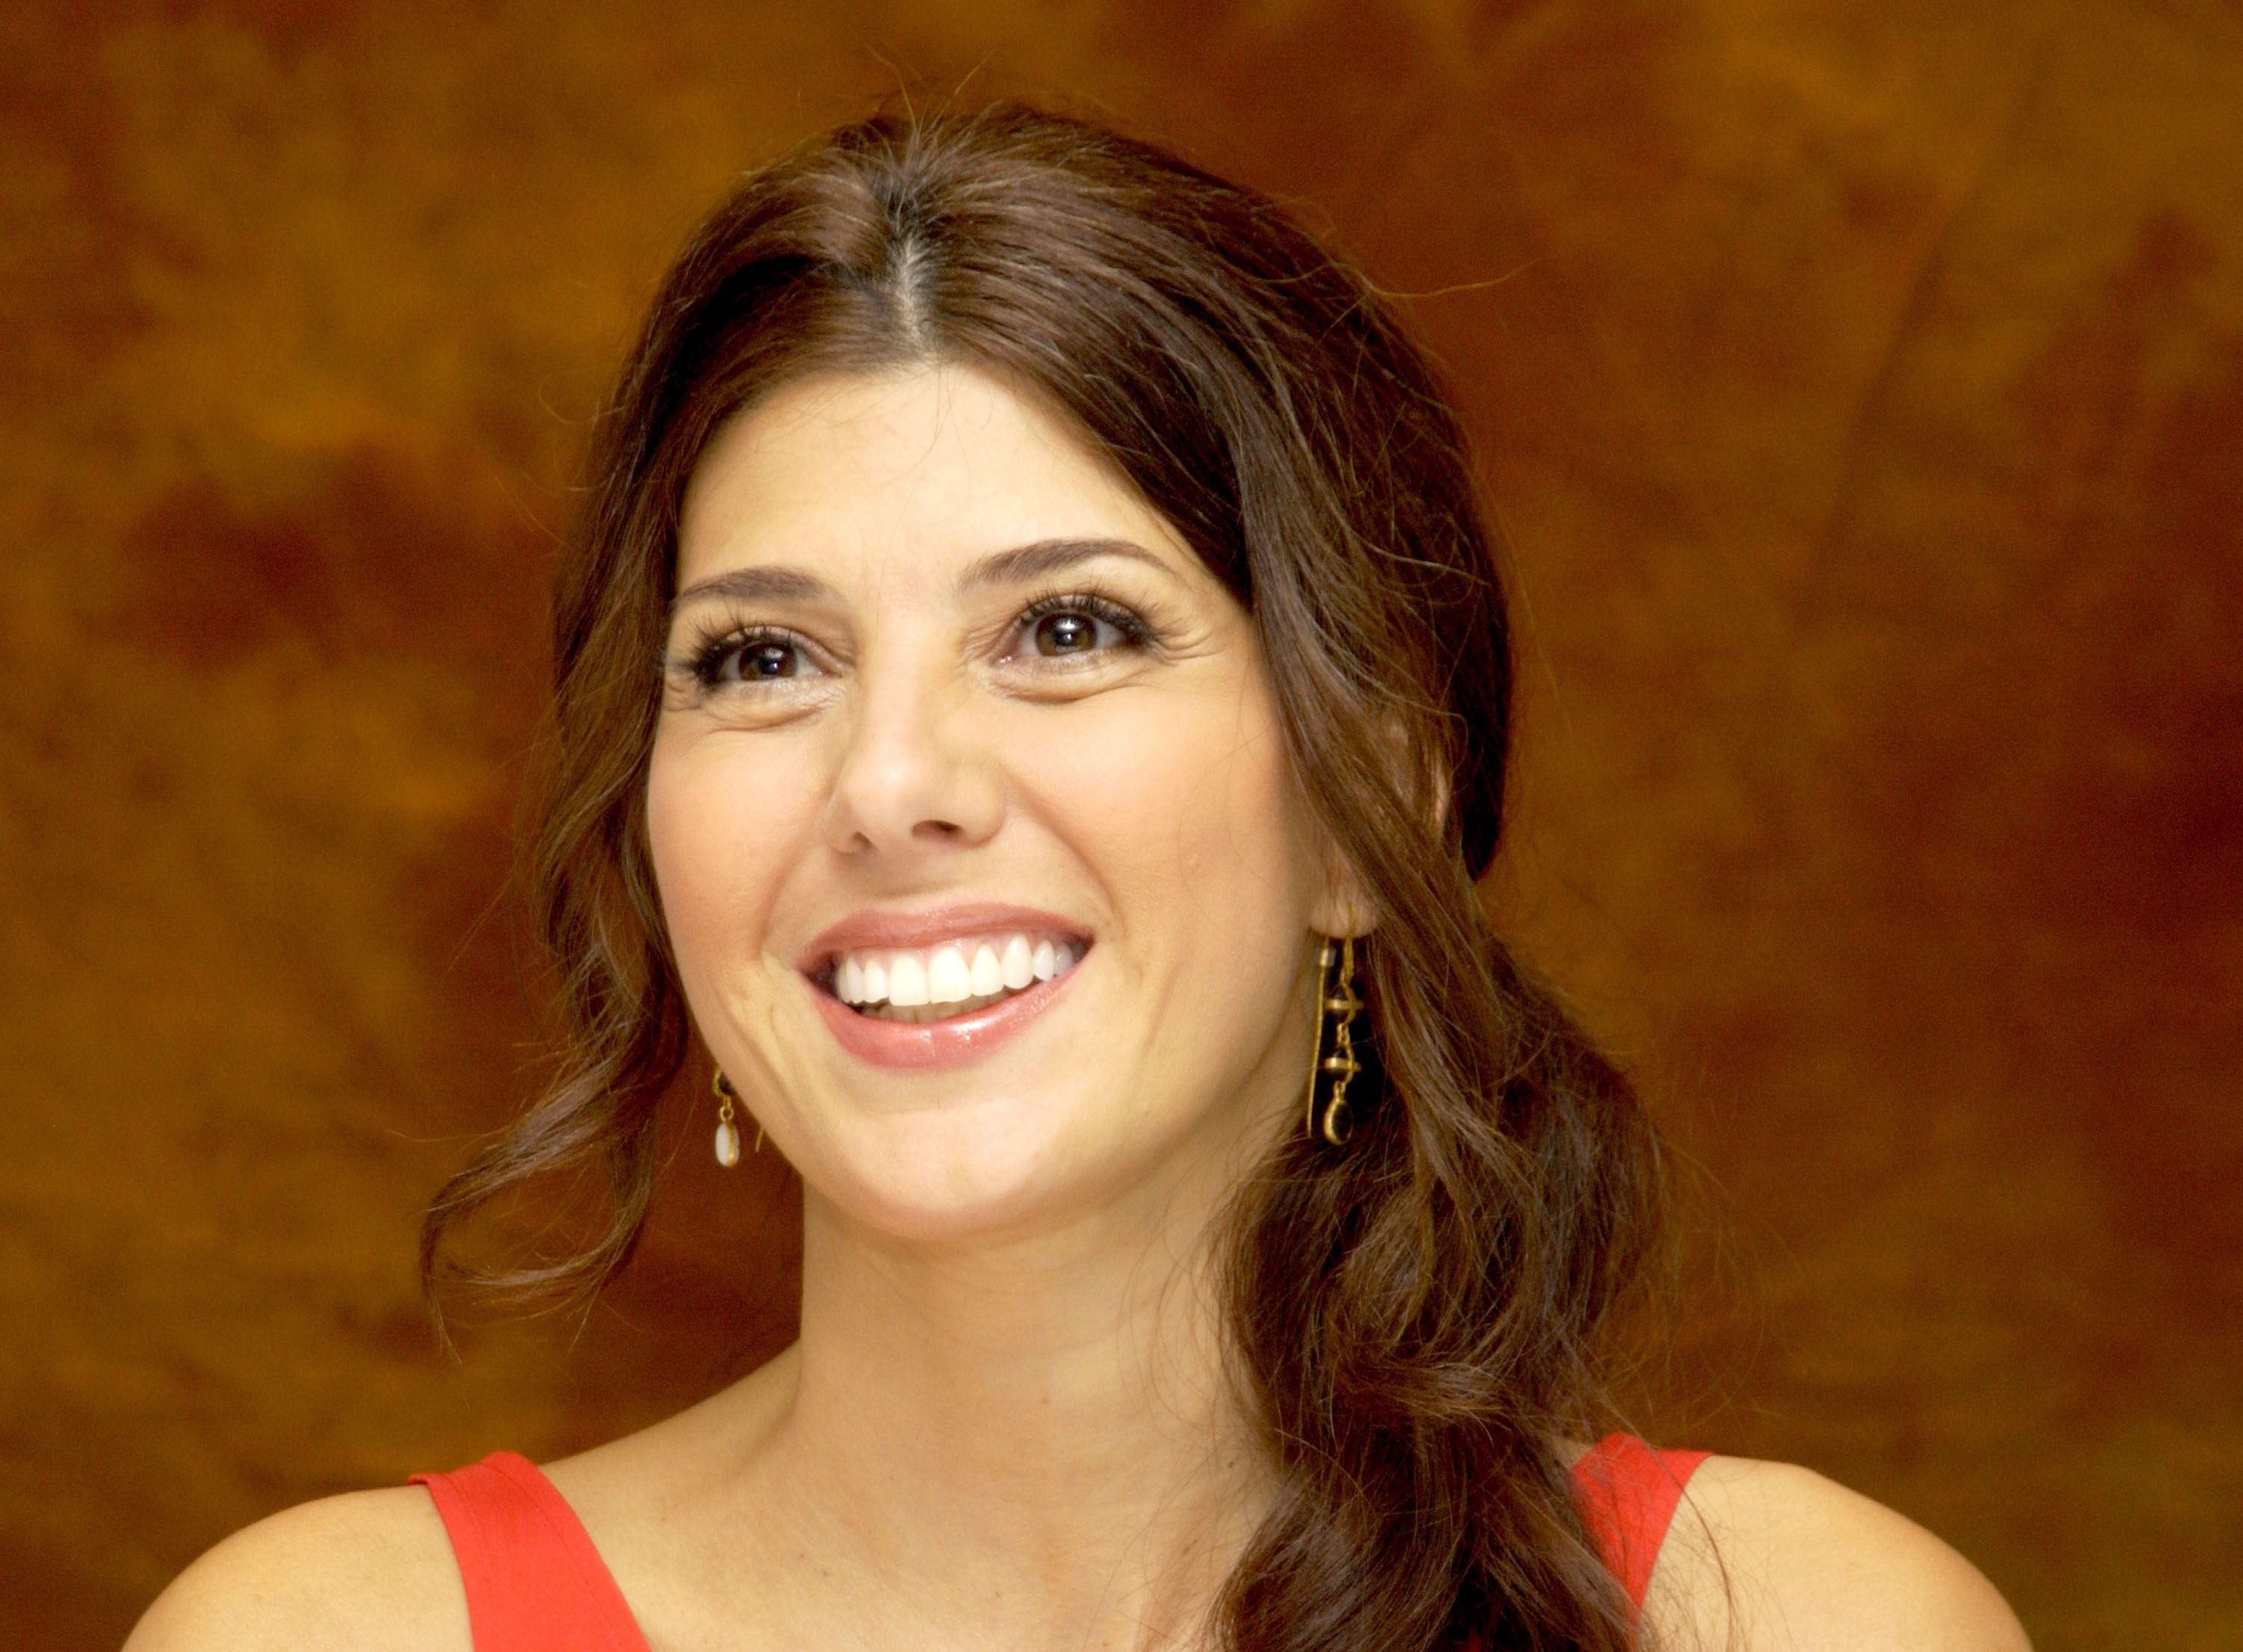 Marisa Tomei Smile Wallpaper Background HD 57407 3000x2210 px